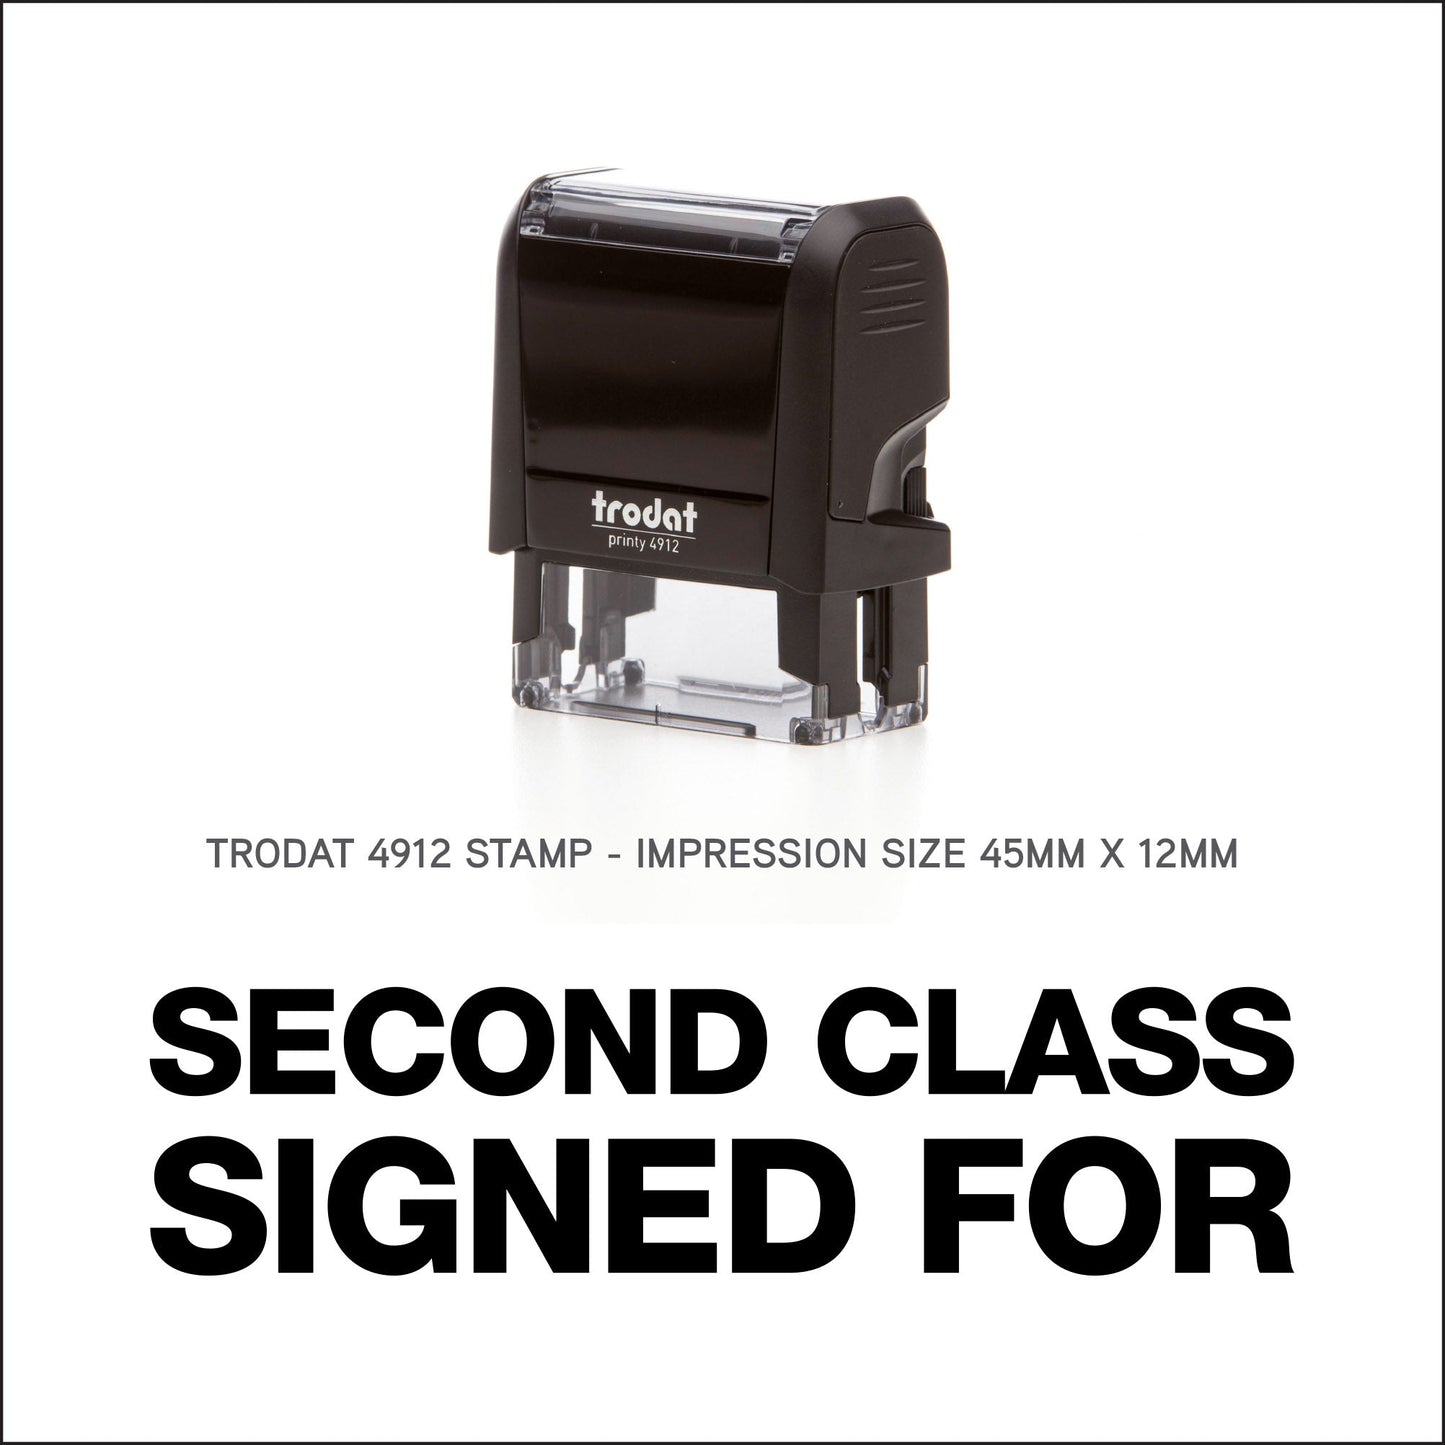 Second Class Signed For - Rubber Stamp - Trodat 4912 - 45mm x 12mm Impression